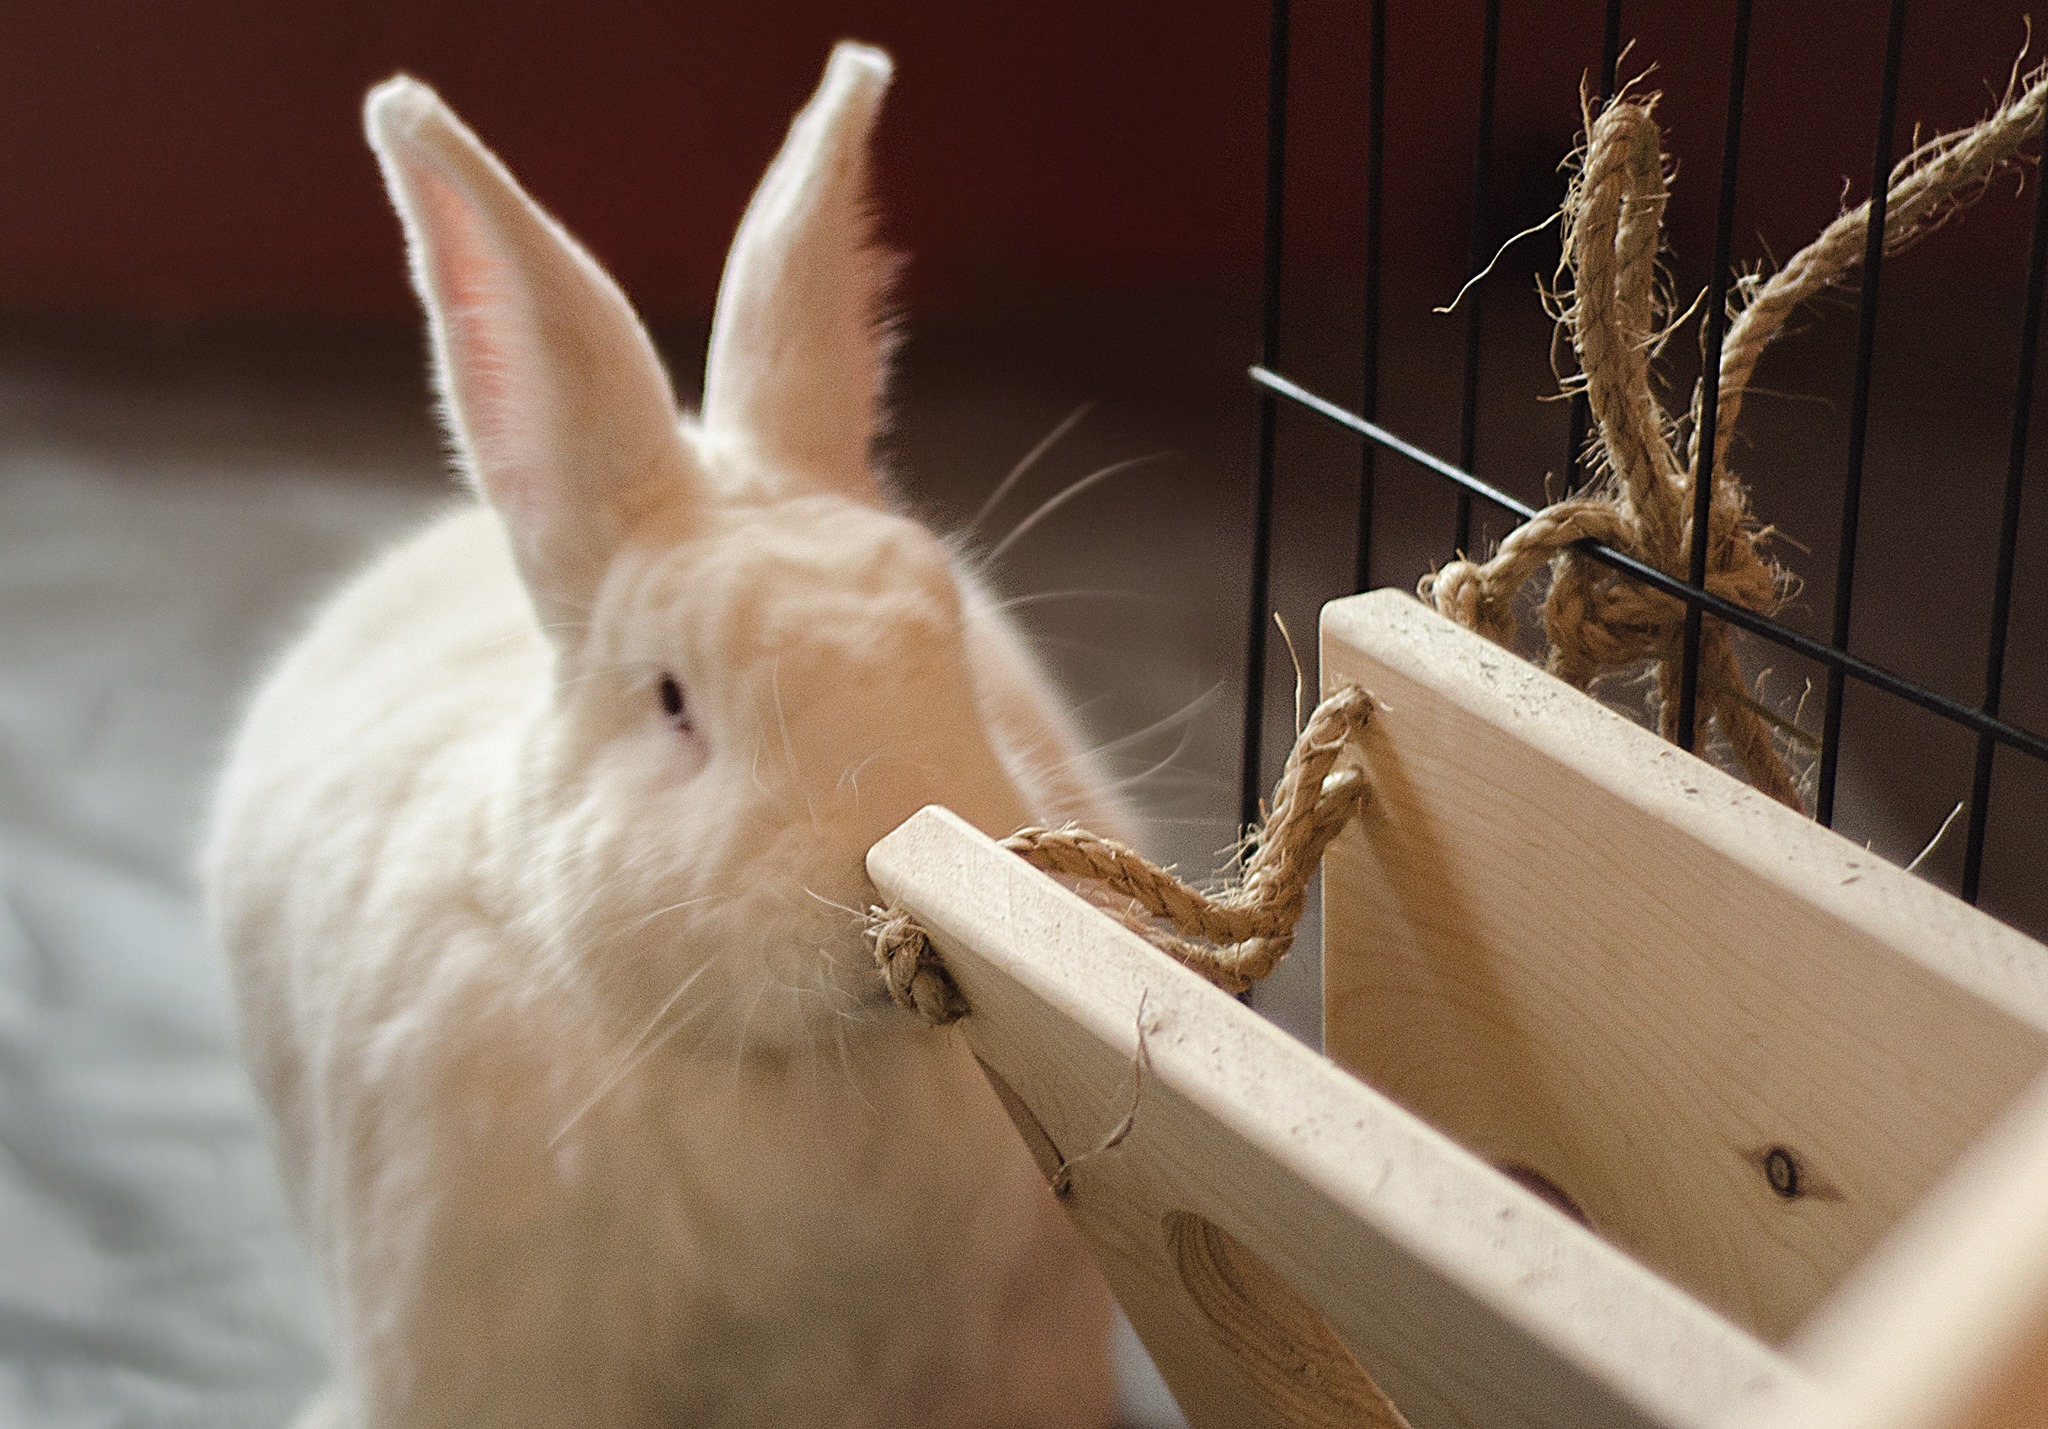 Belinda the spokesrabbit poses with an empty hay holder.